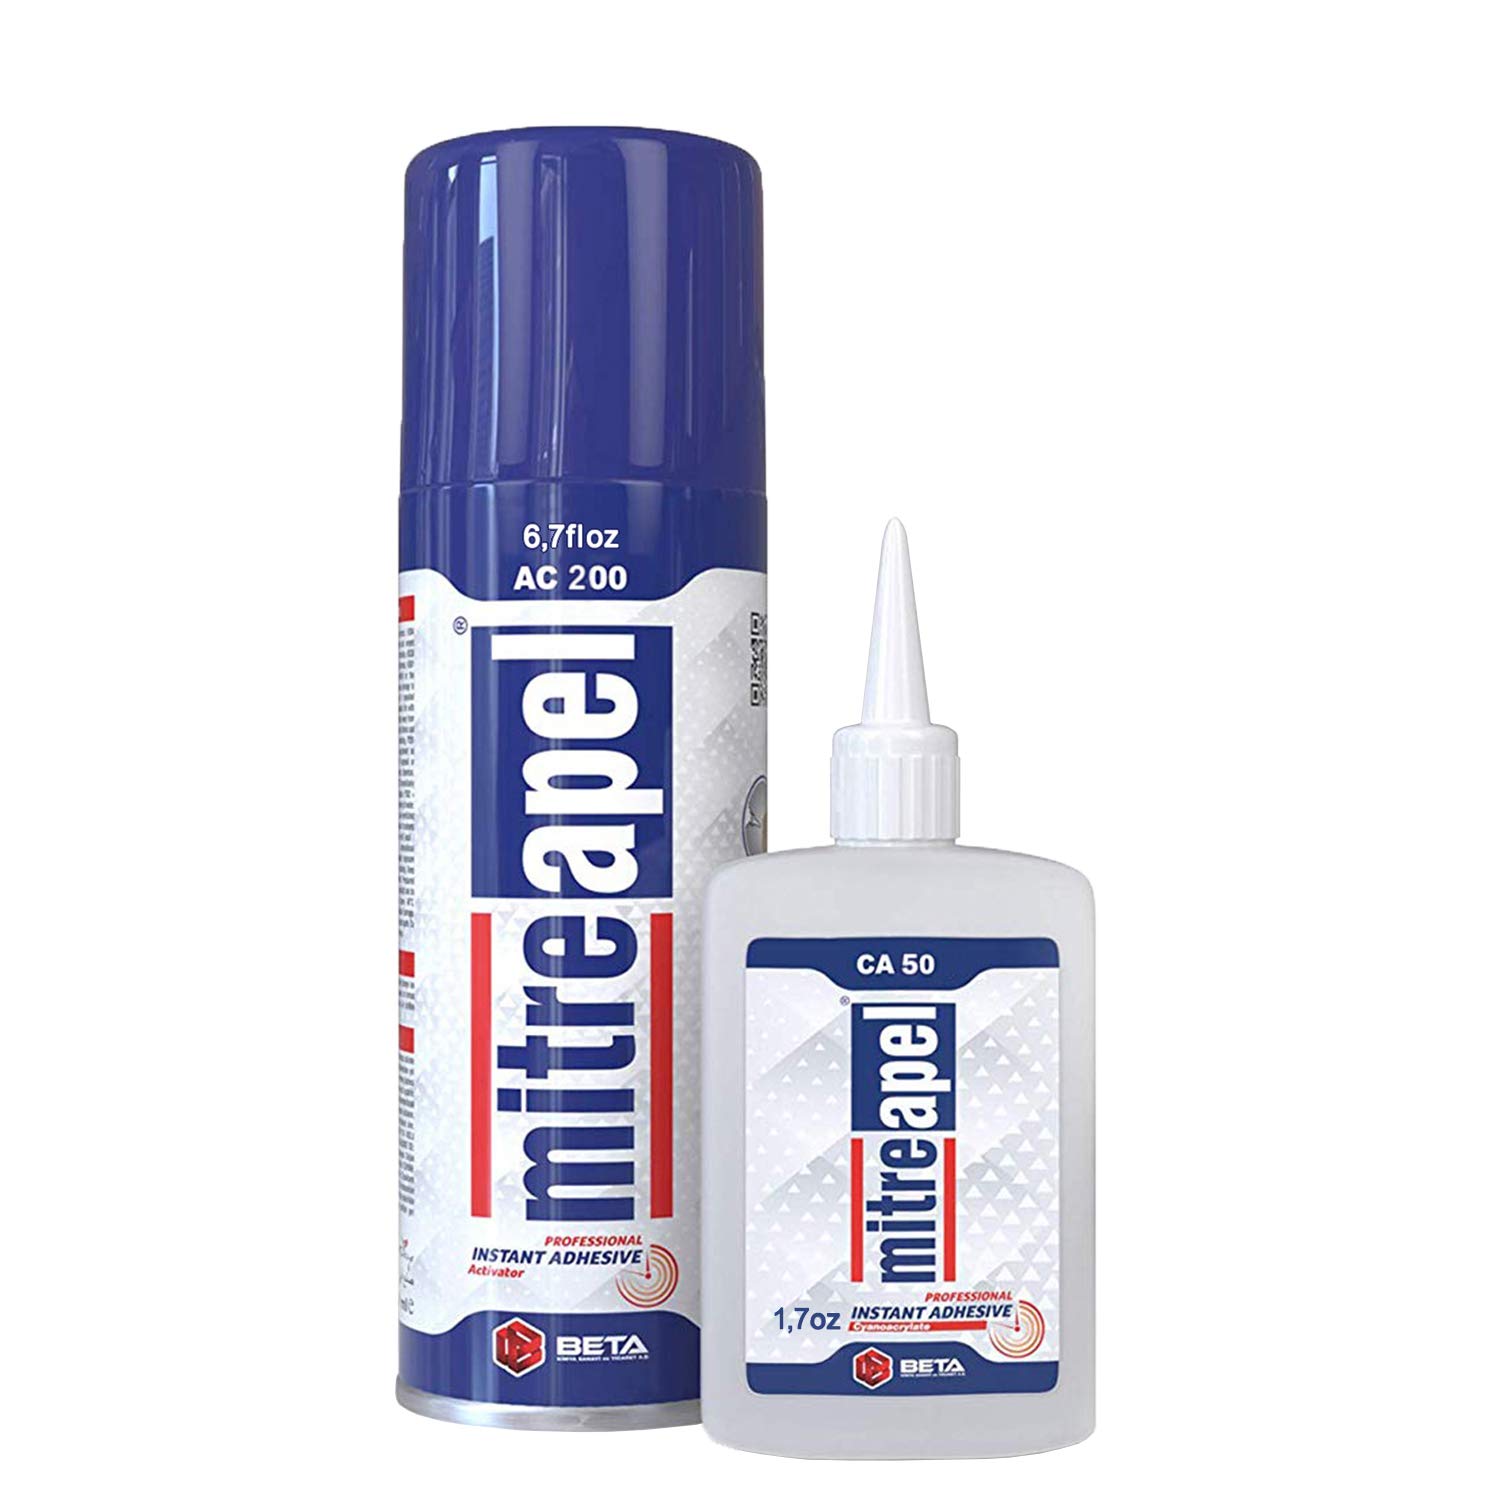 MITREAPEL Super CA Glue (1.7 oz) with Spray Adhesive Activator (6.7 fl oz) Ca Glue with Activator for Wood, Plastic, Metal, Leather, Ceramic&Cyanoacrylate Glue for Crafting&Building (1 Pk)